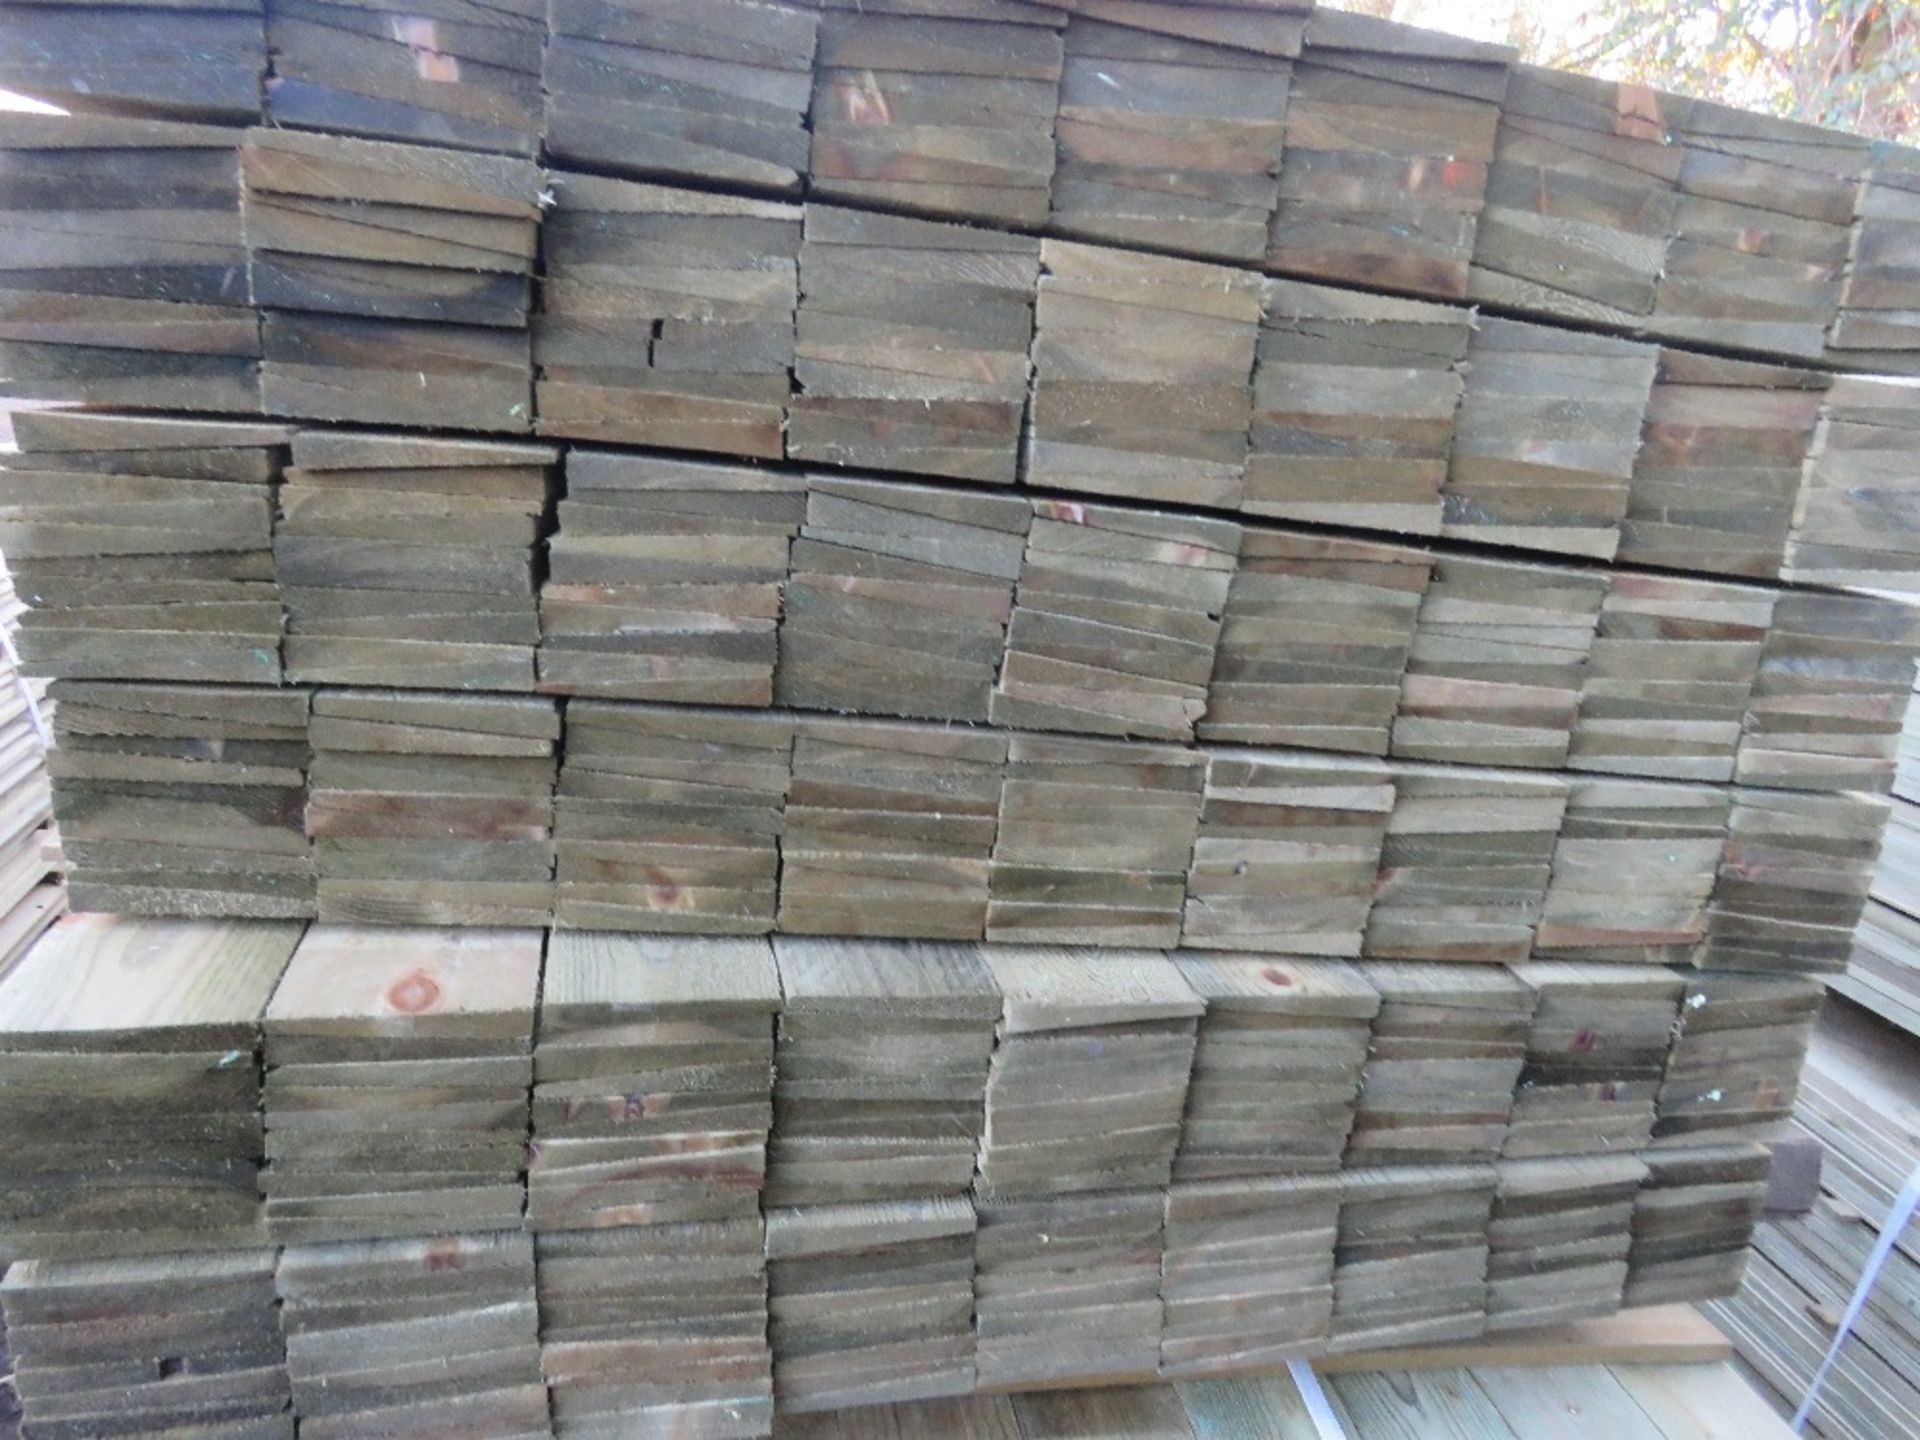 LARGE PACK OF TREATED FEATHER EDGE FENCE CLADDING TIMBER BOARDS. SIZE: 1.5M LENGTH X 10CM WIDTH APPR - Image 2 of 3